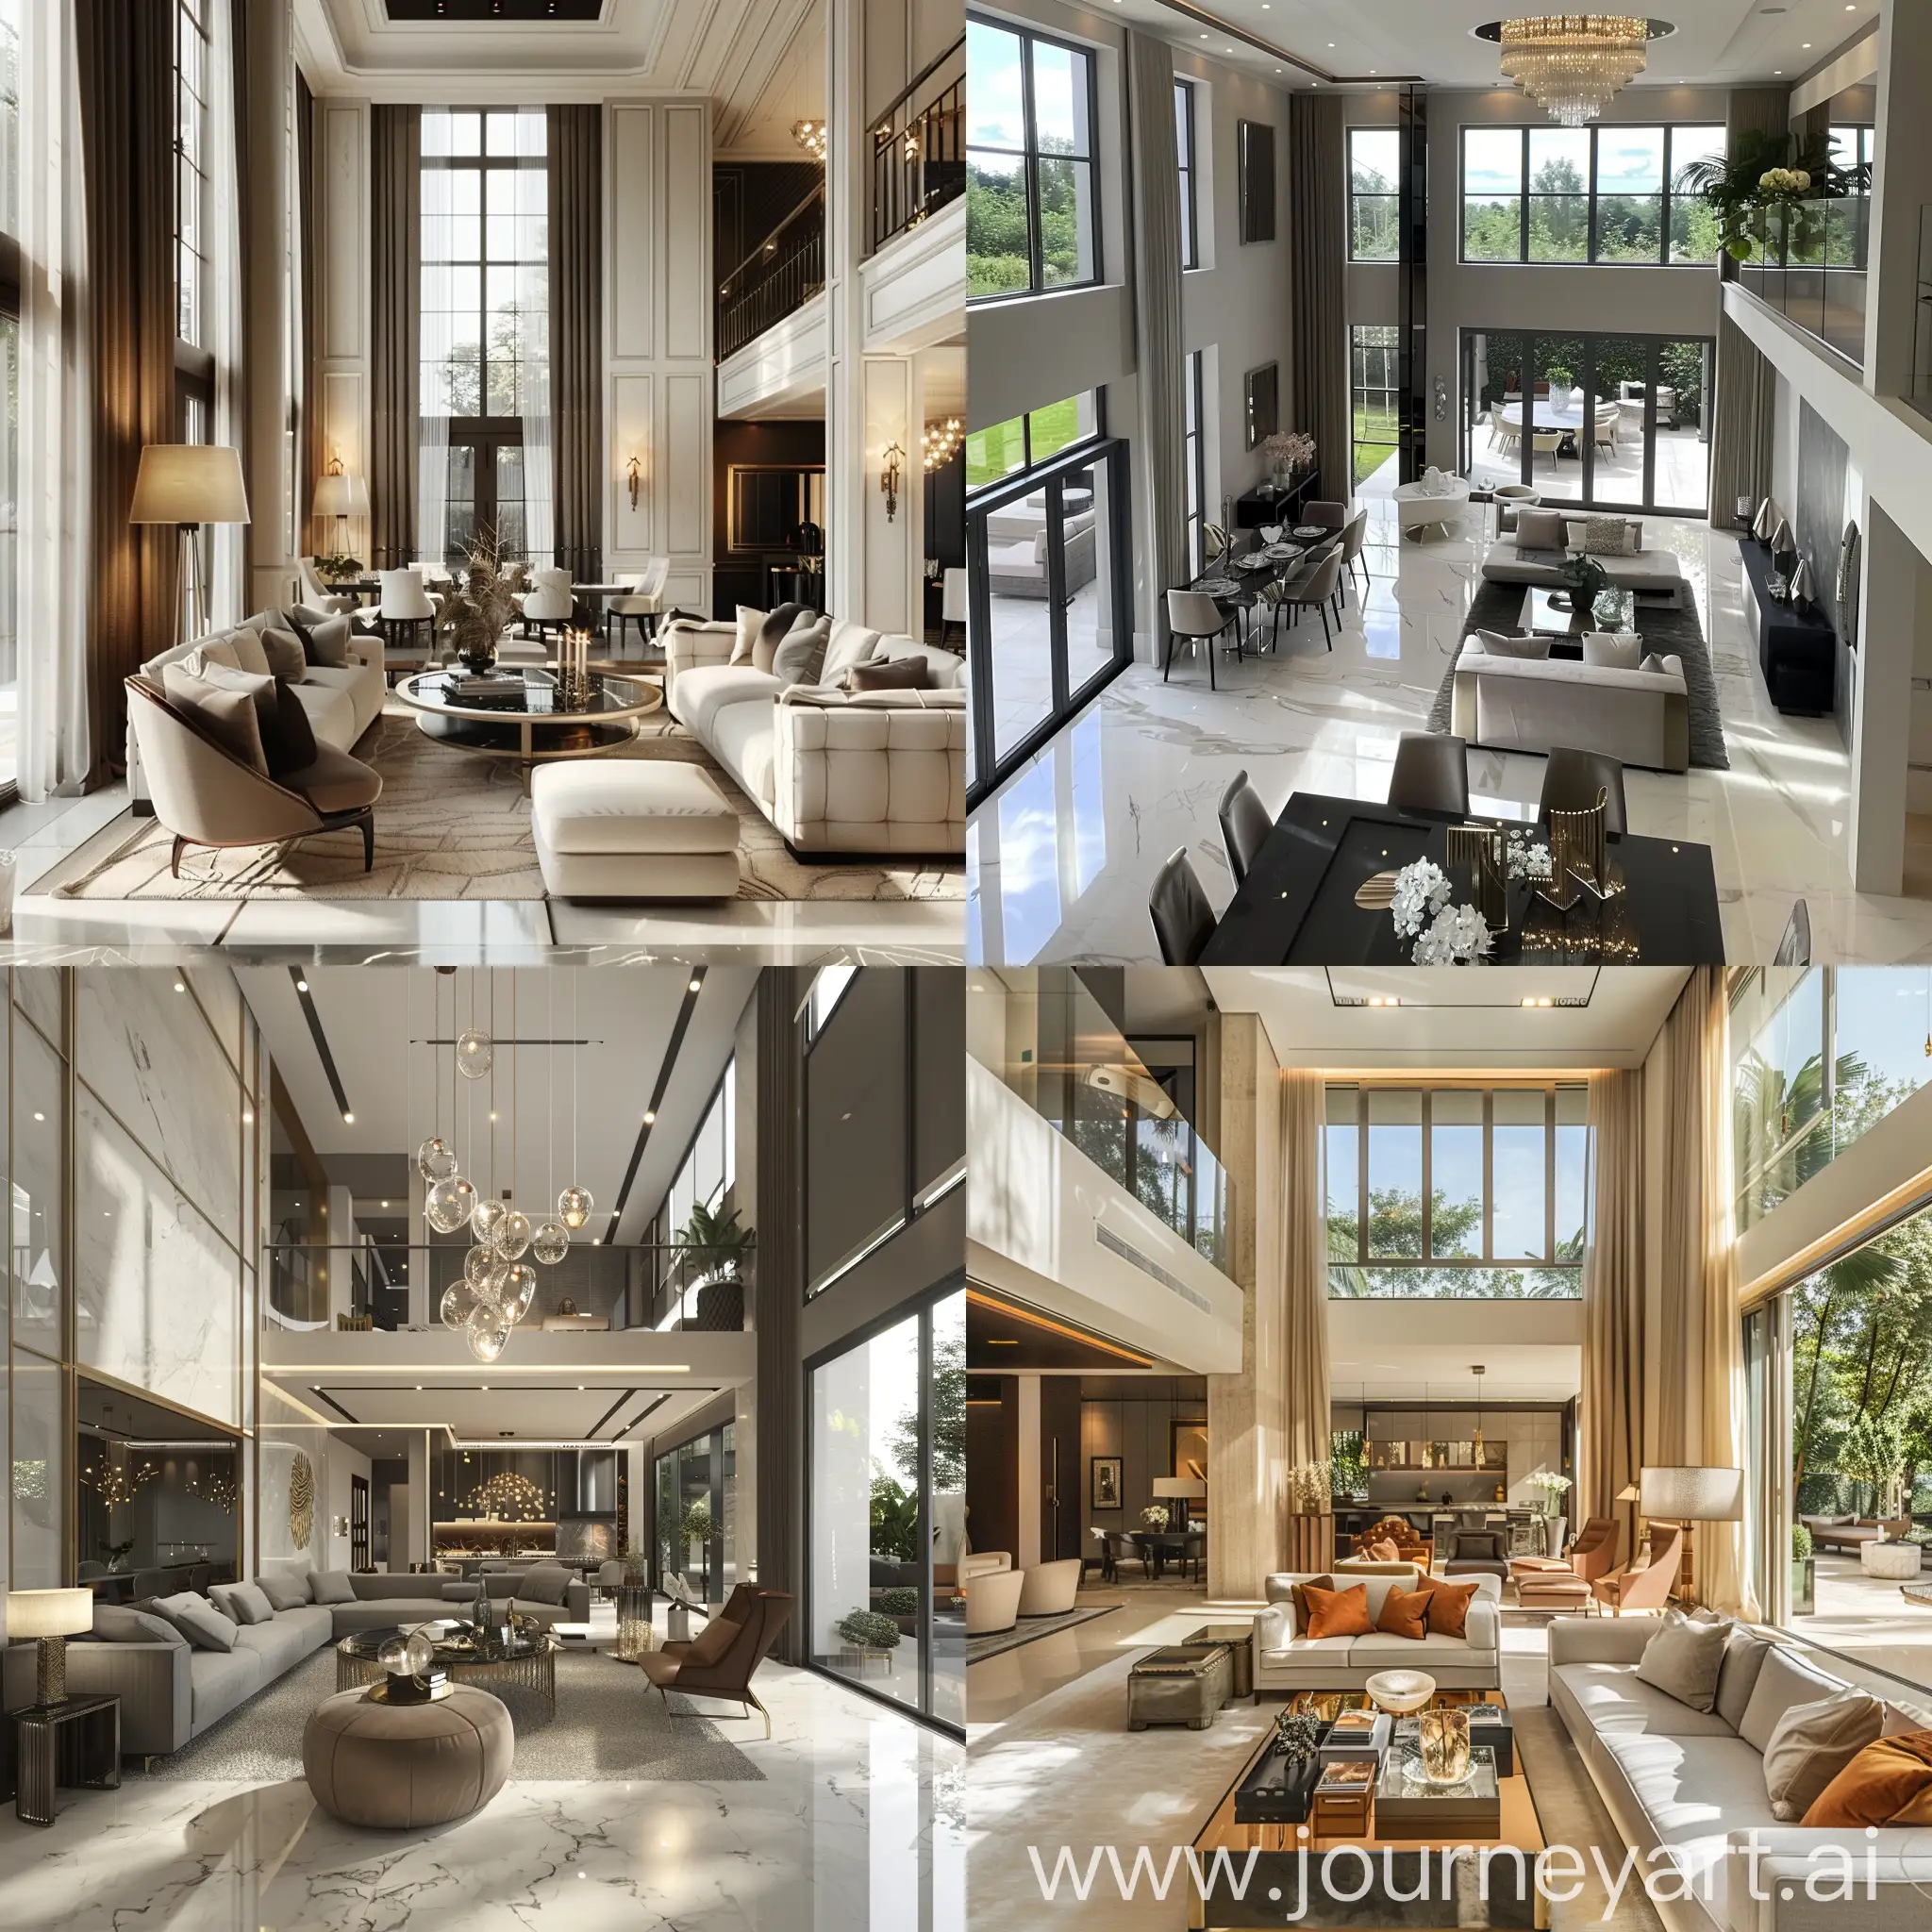 A luxurious dream house that is open plan, featuring sophisticated and elegant furniture. The interior design showcases spacious living areas with large windows allowing plenty of natural light.